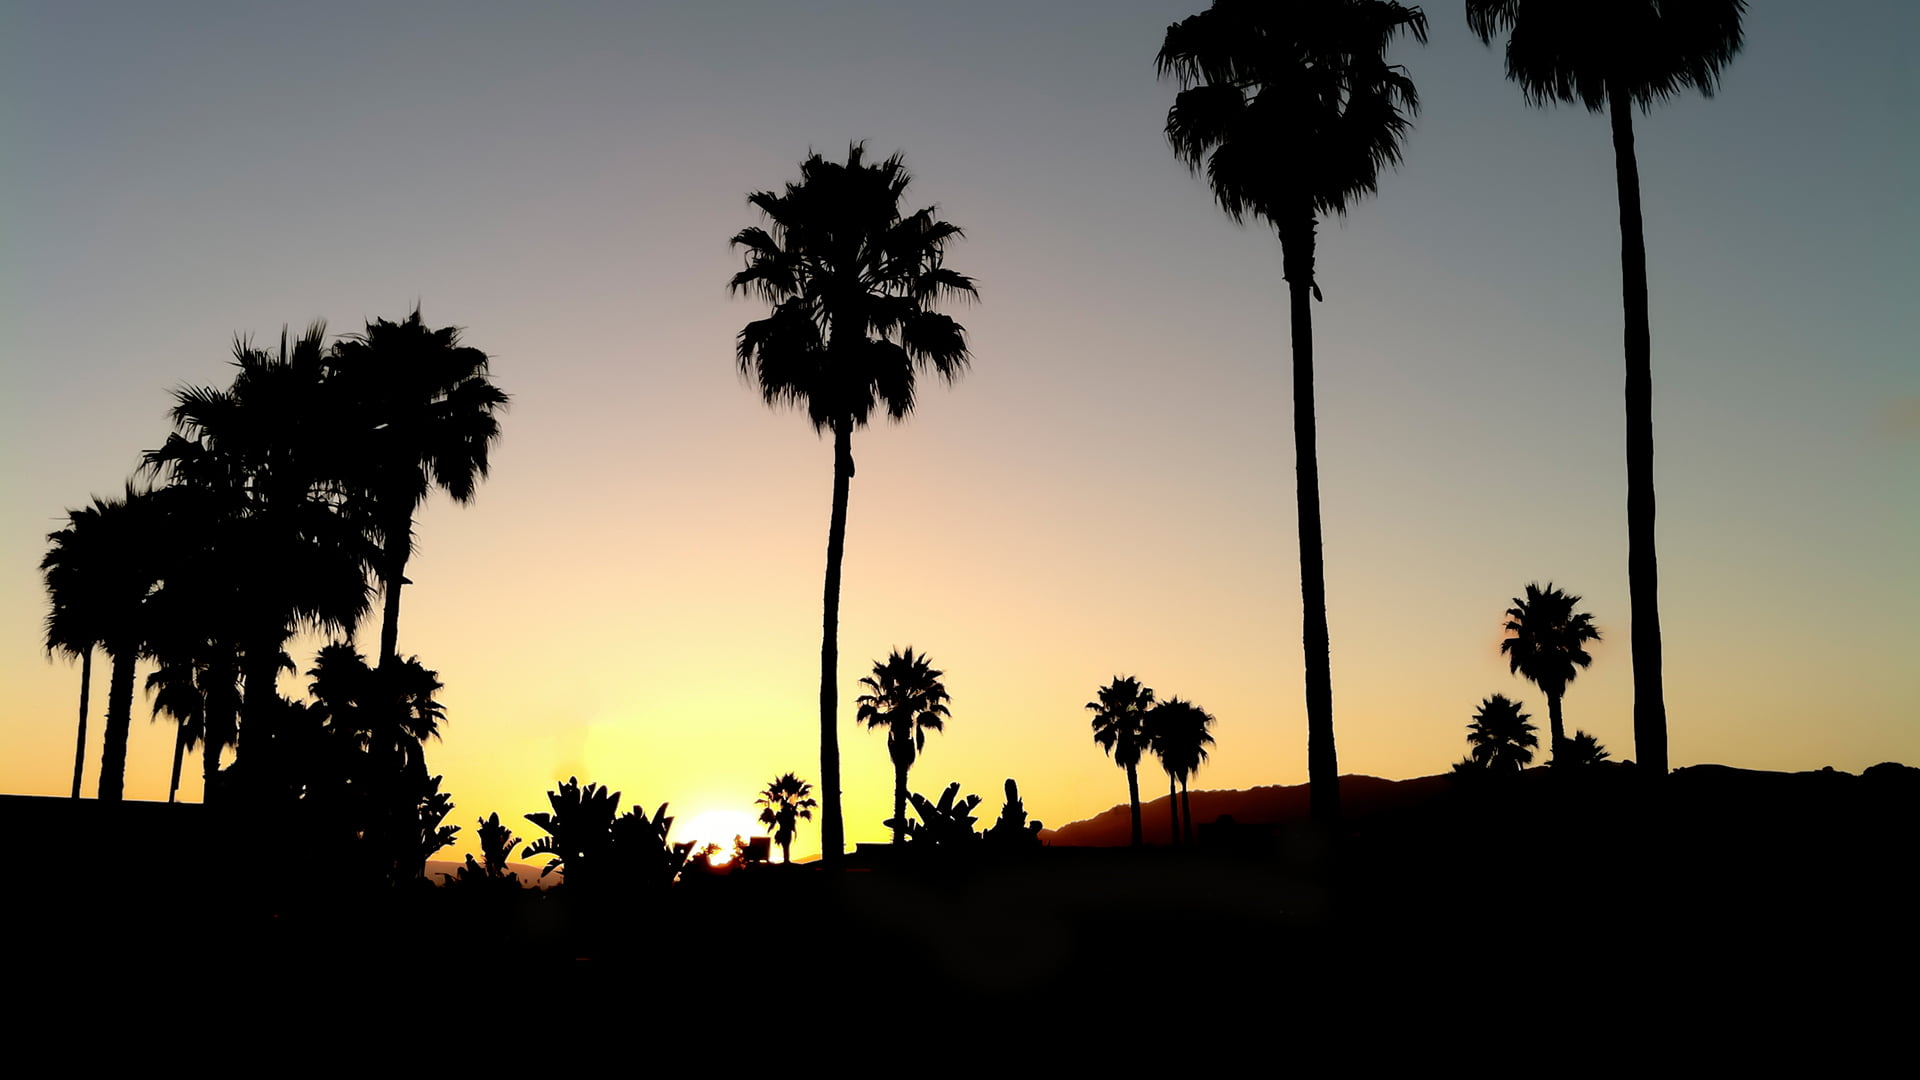 Silhouette of trees during golden hour, sunset, black, palm trees ...